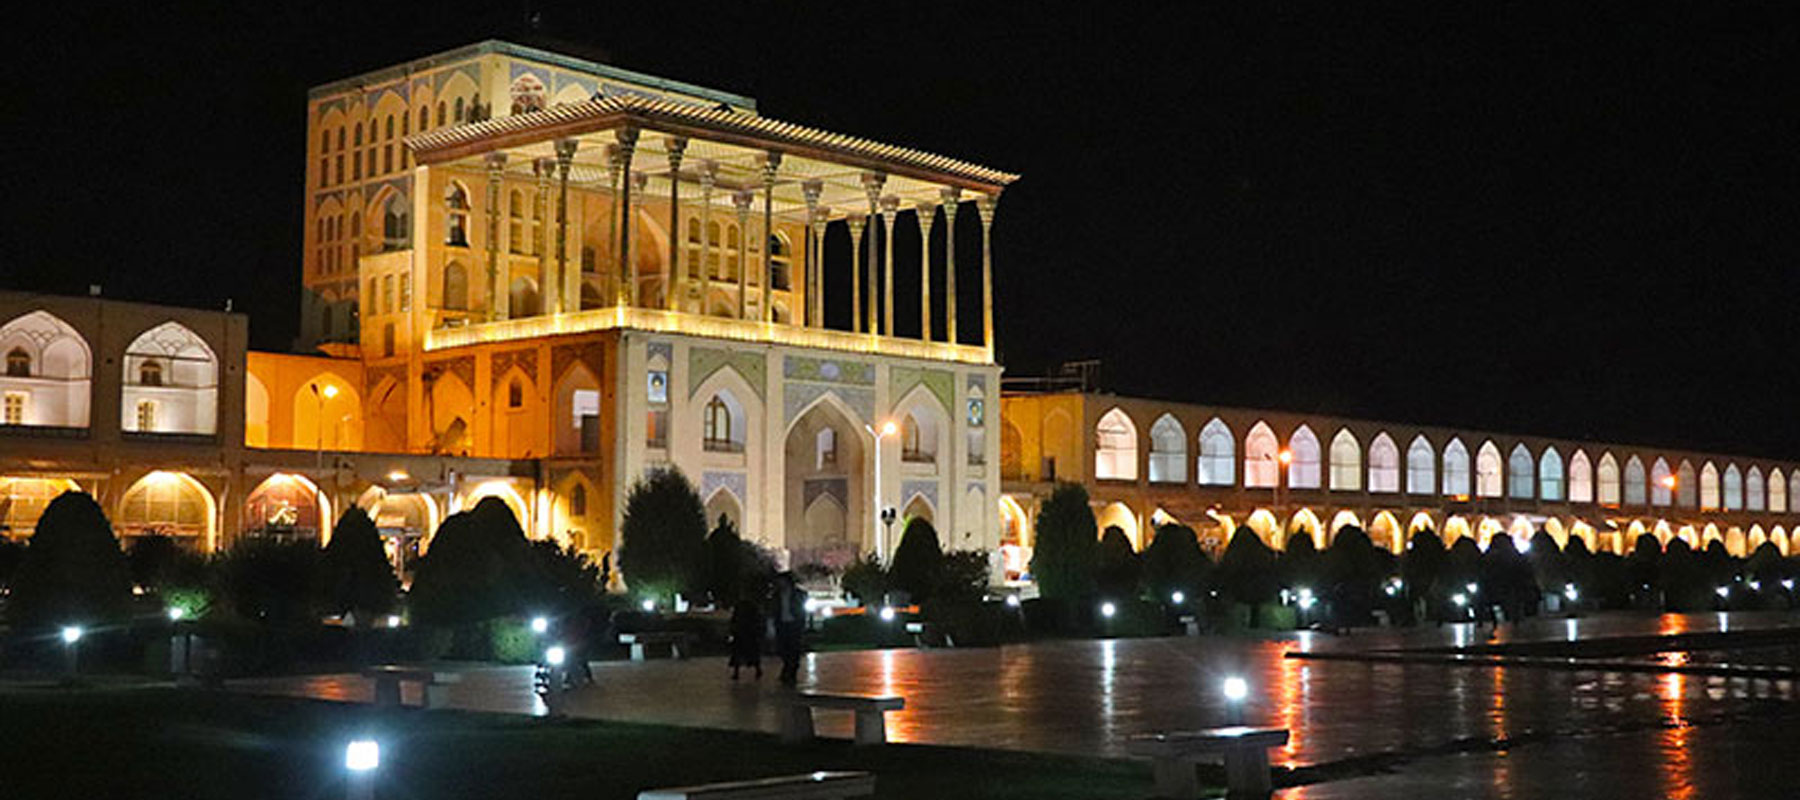 Aali Qapu Mansion: Isfahan's Regal Architectural Marvel